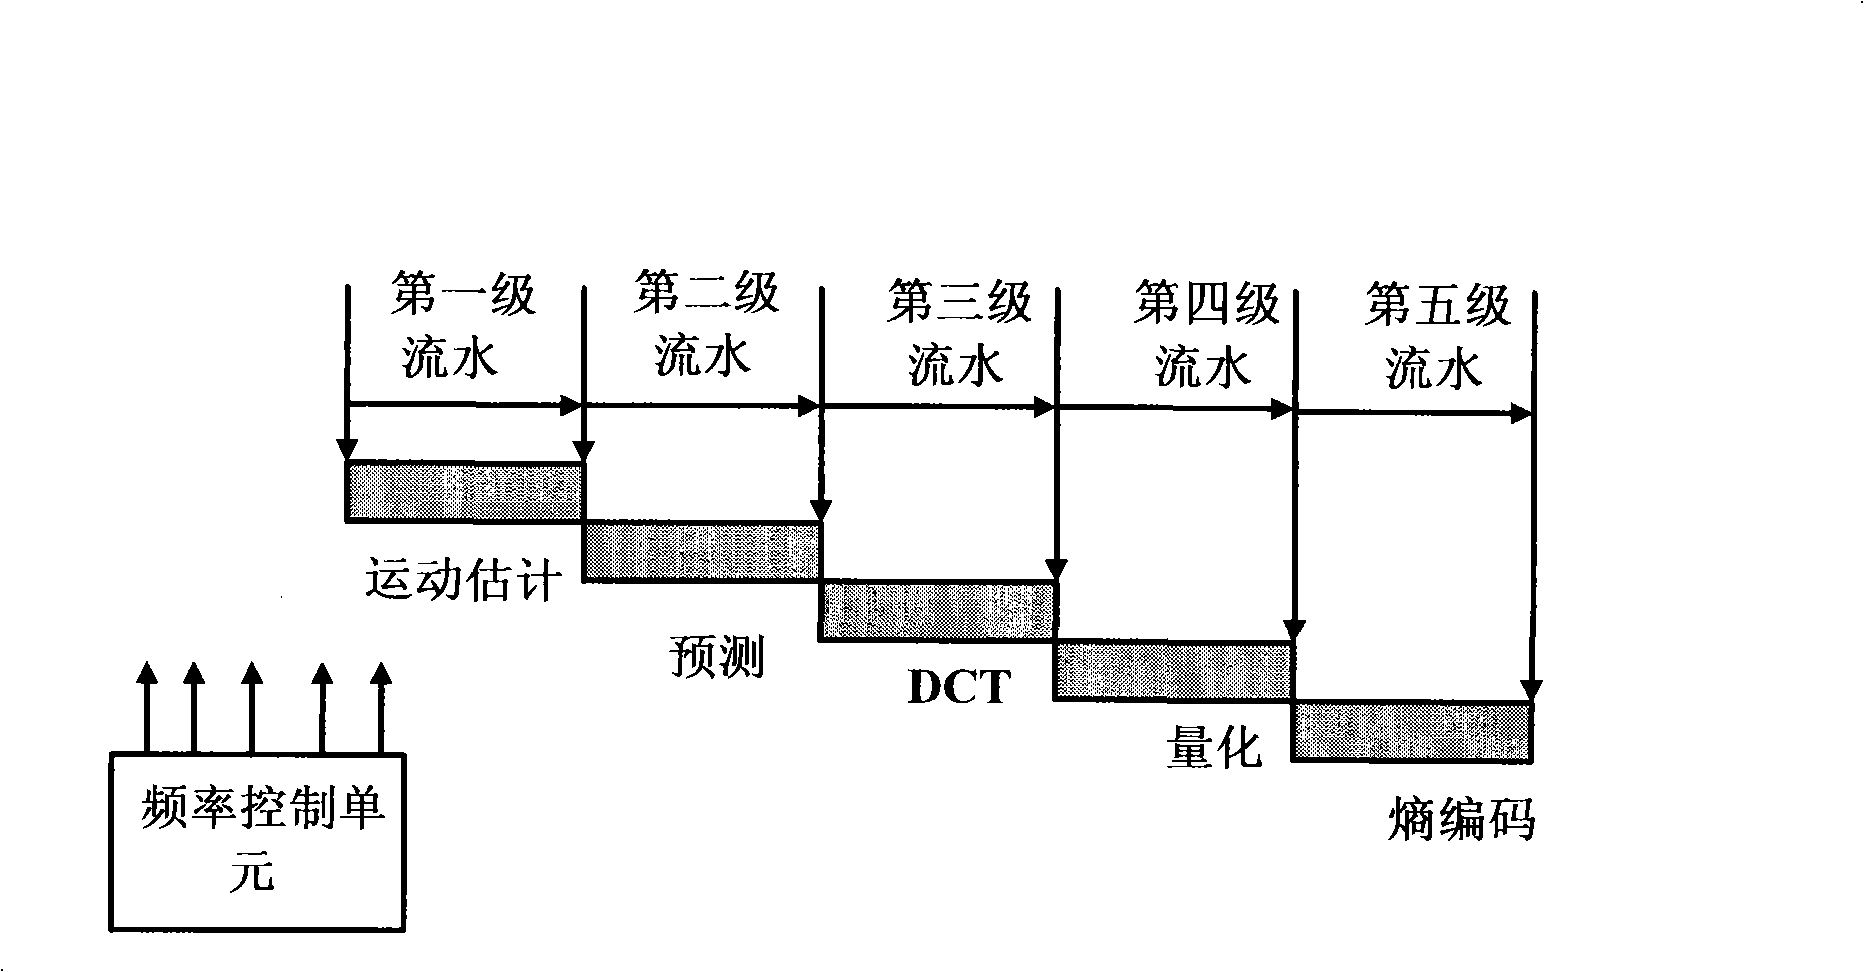 A multi-processor video coding chip device and method